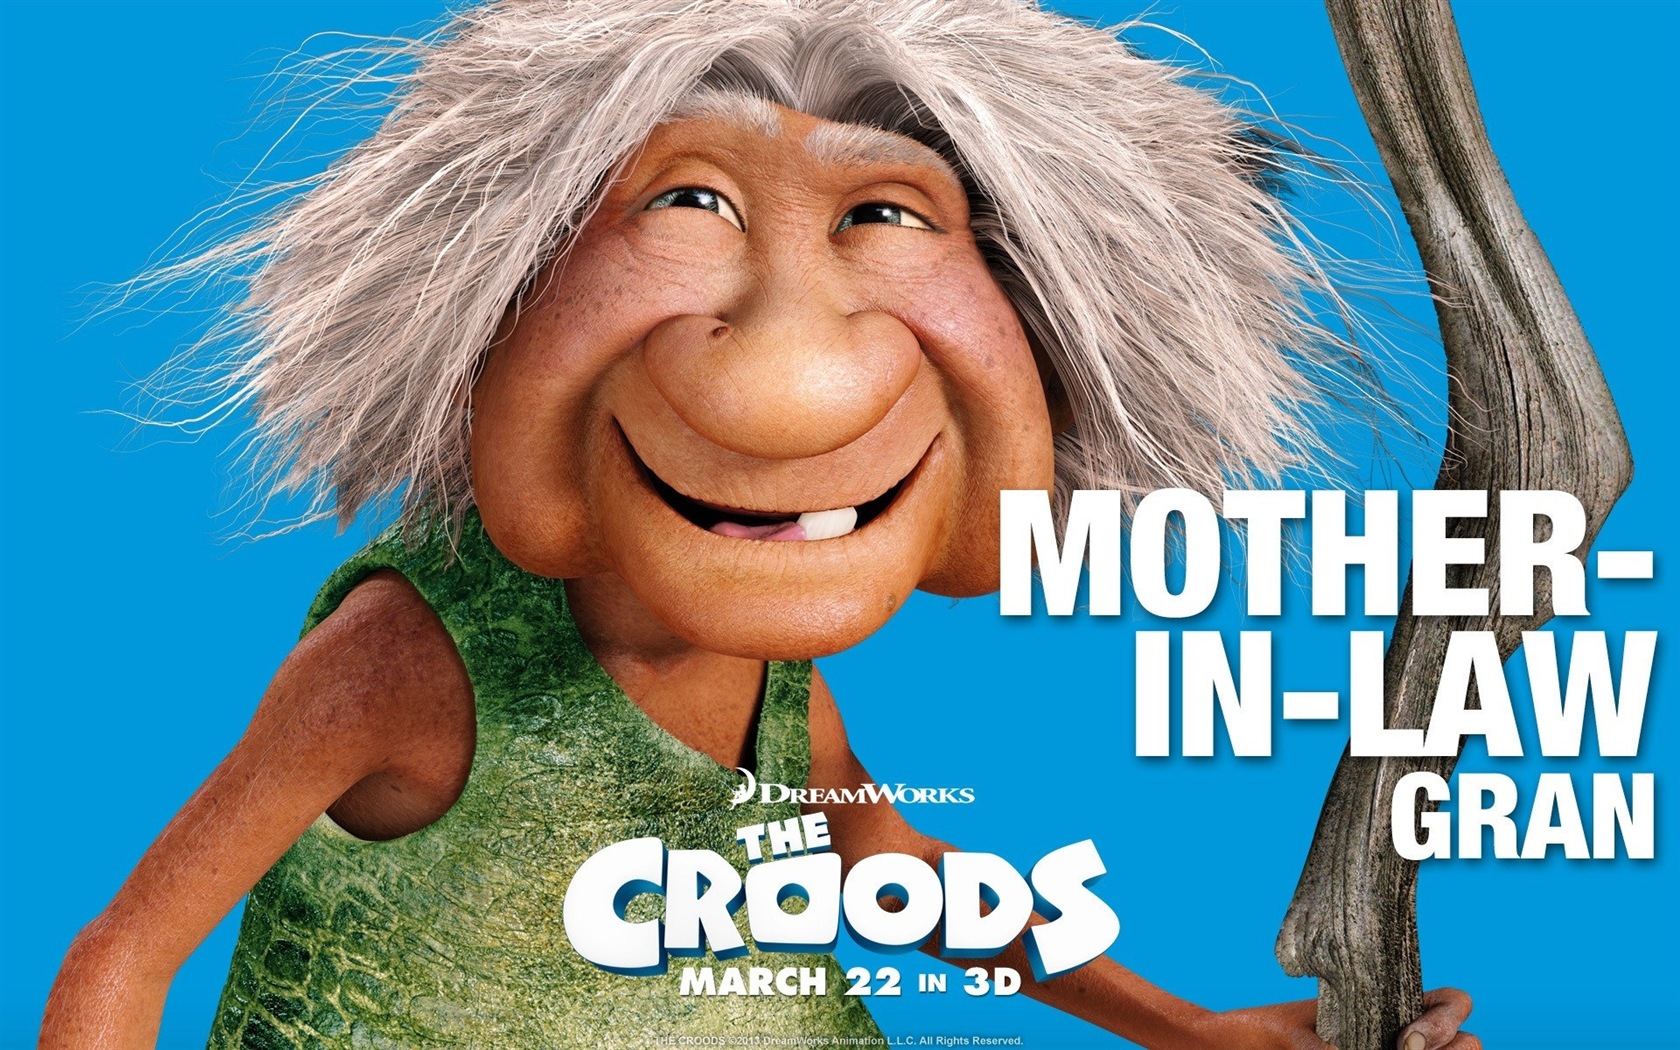 V Croods HD Movie Wallpapers #6 - 1680x1050